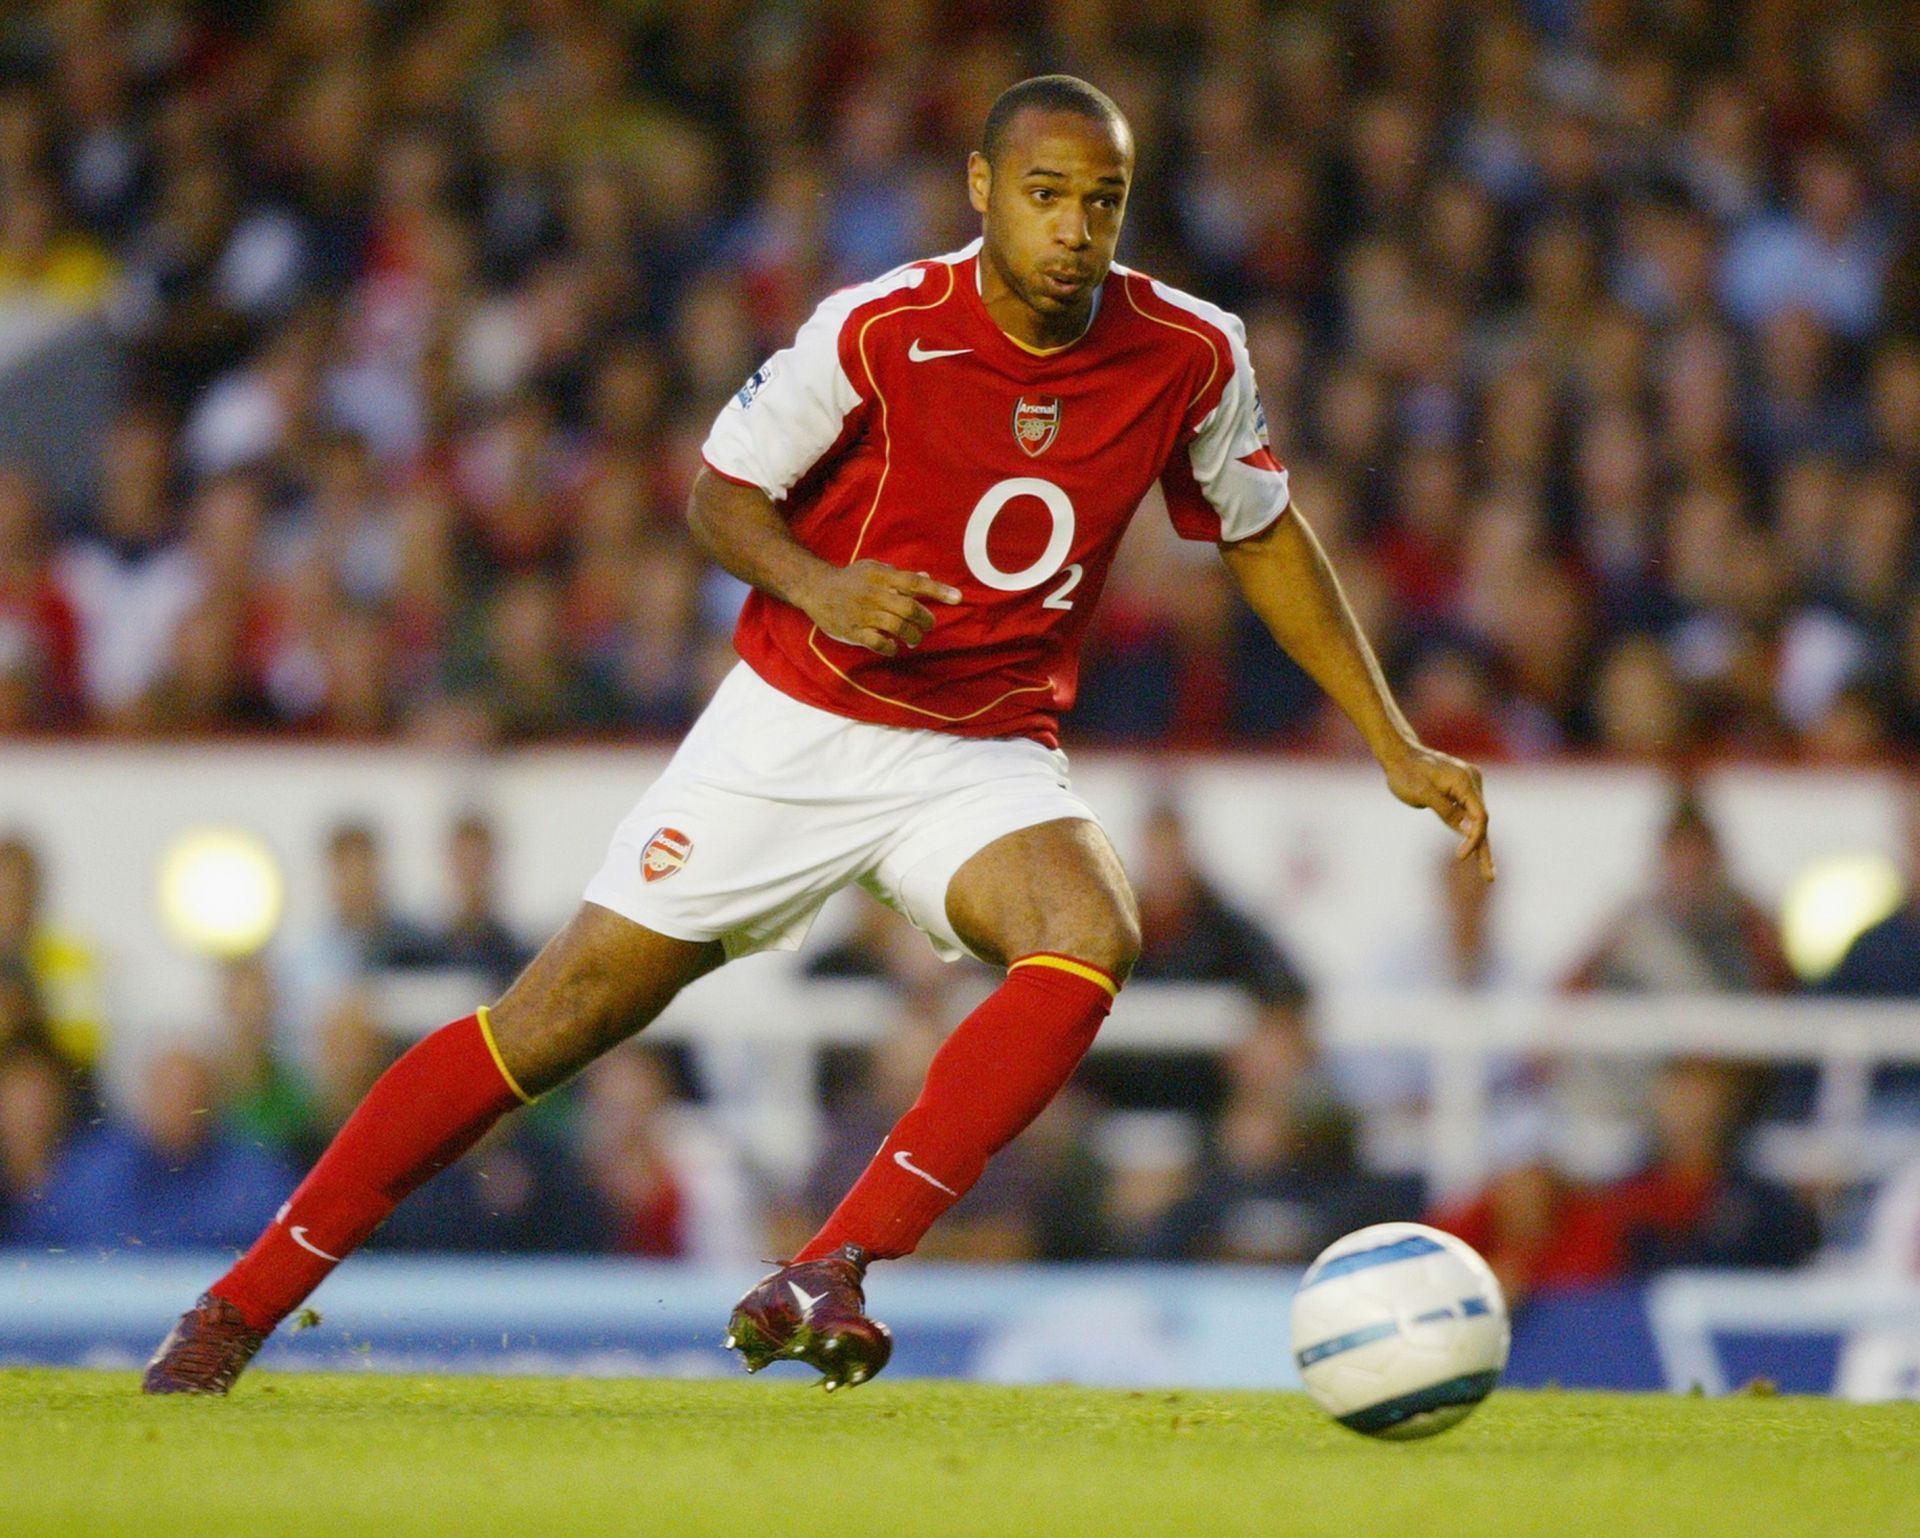 Thierry Henry of Arsenal